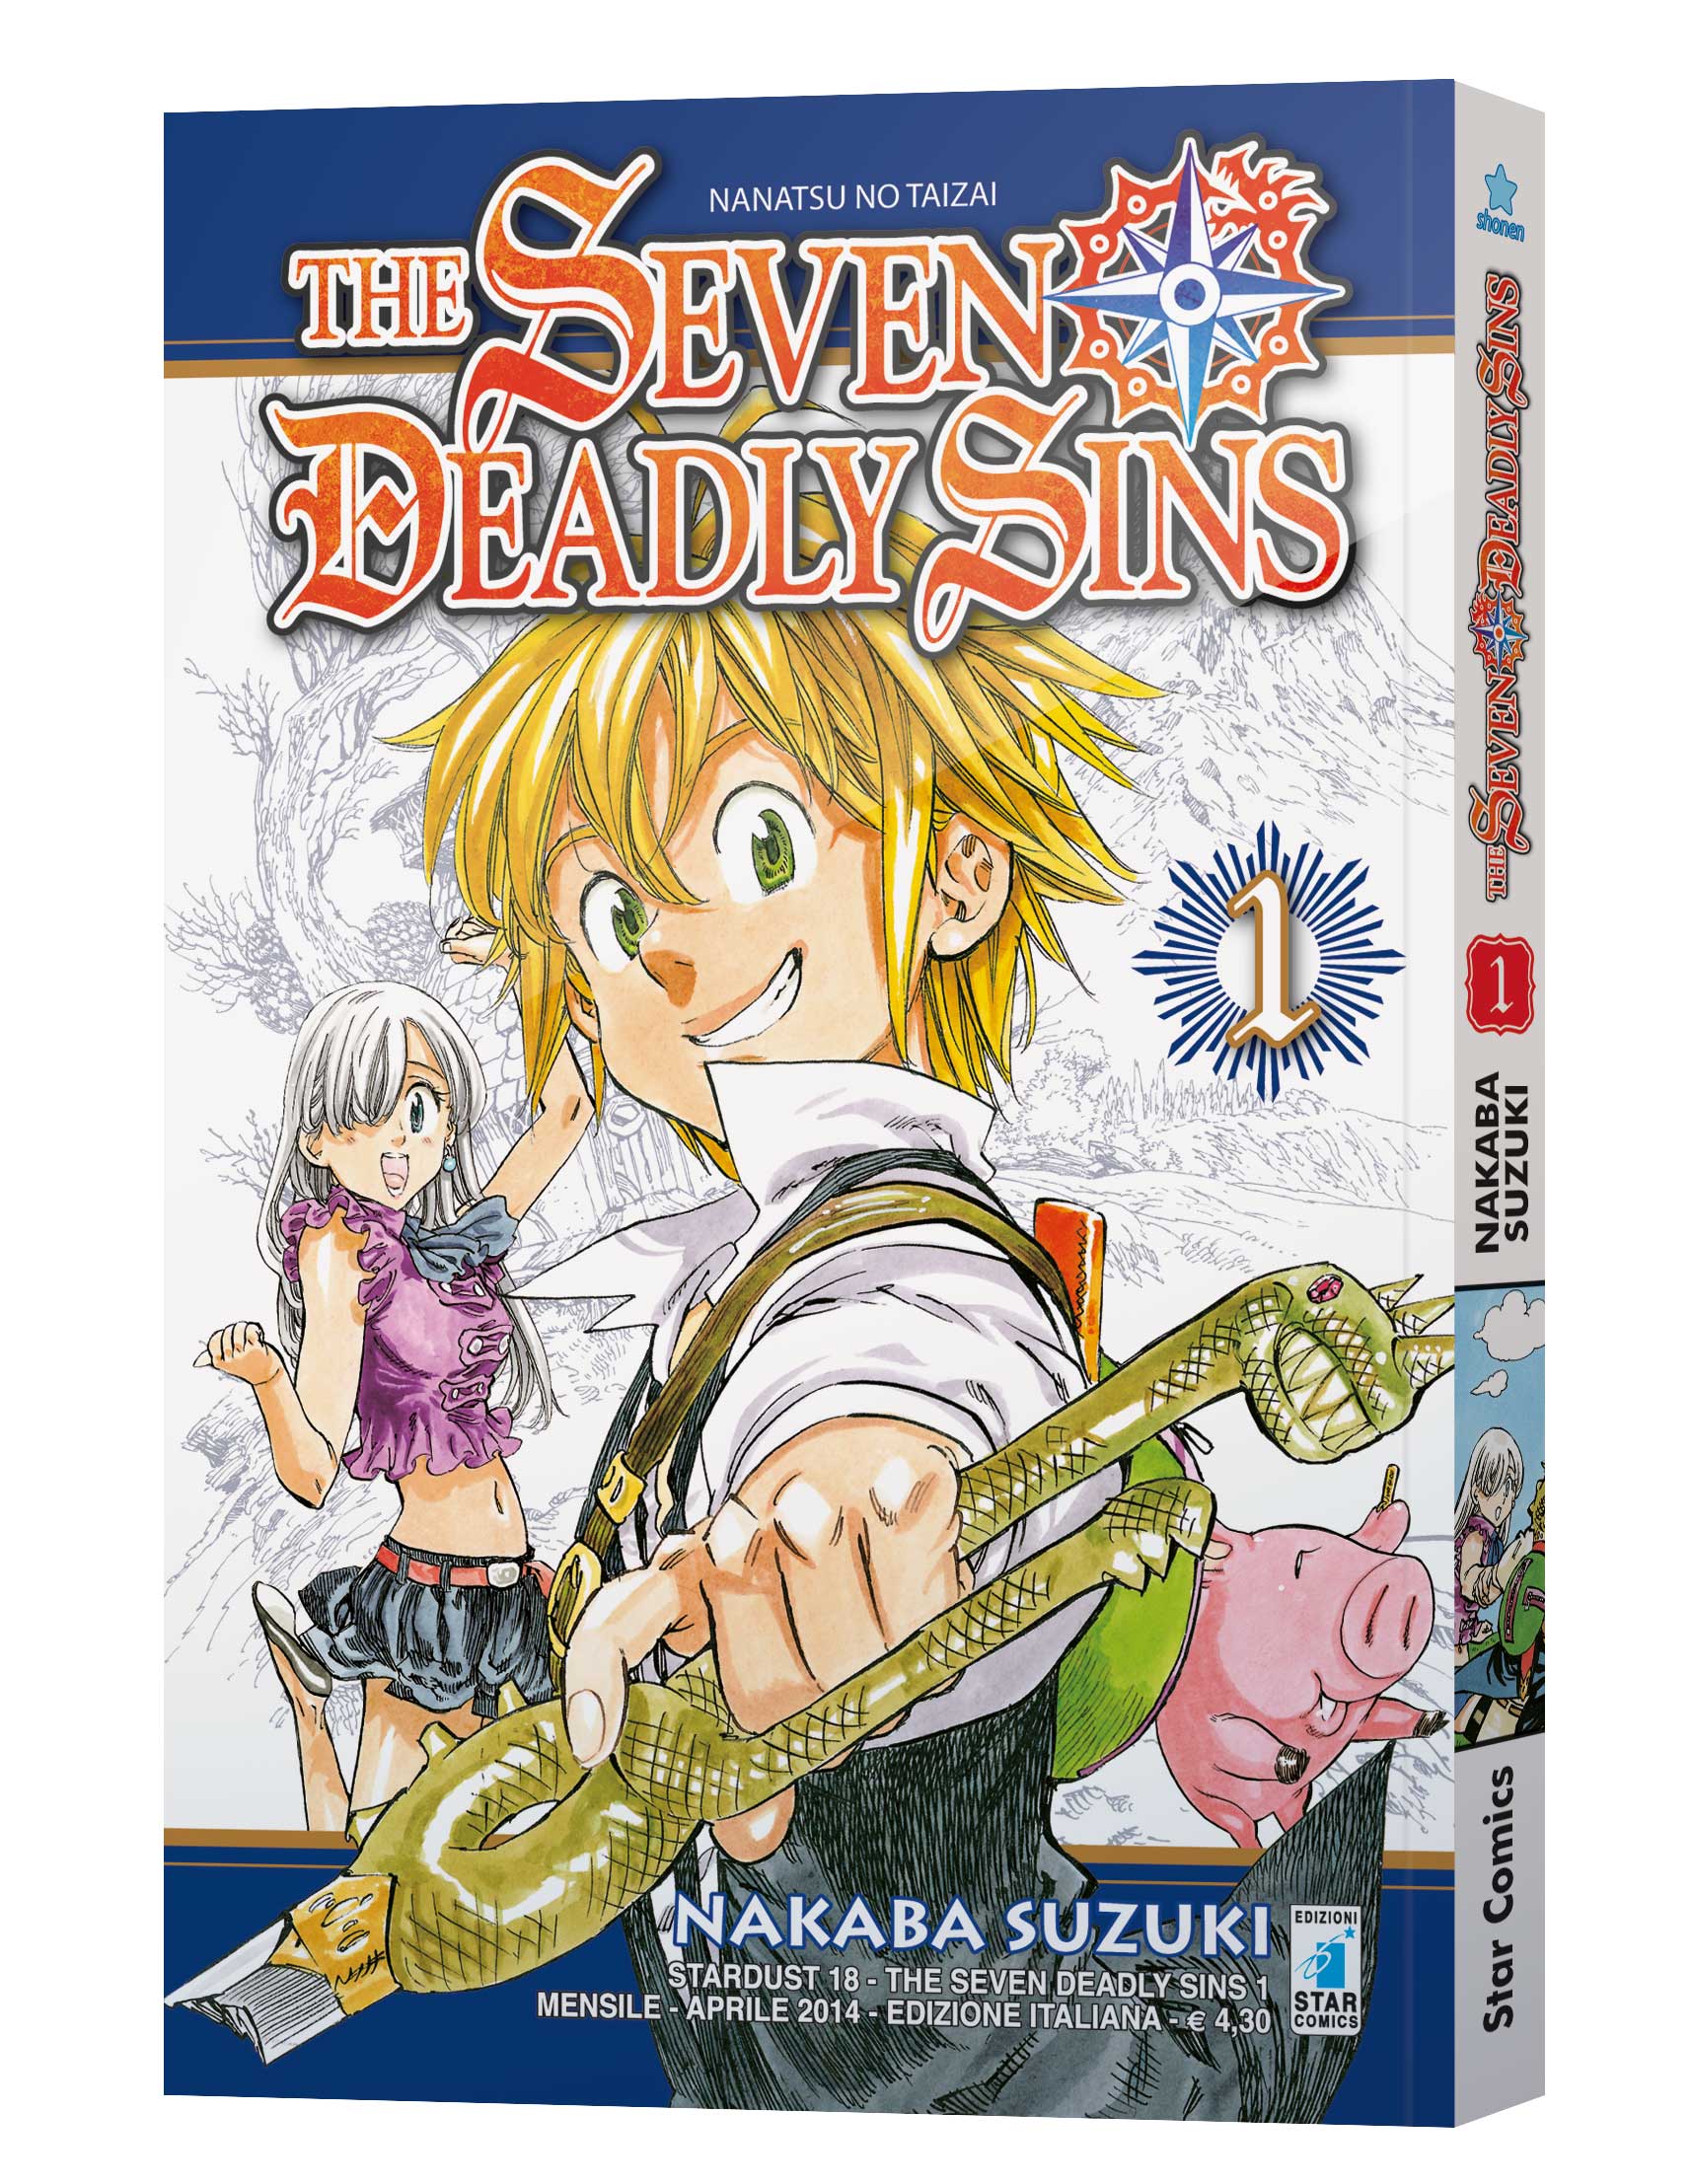 THE SEVEN DEADLY SINS COLLECTION n. 1